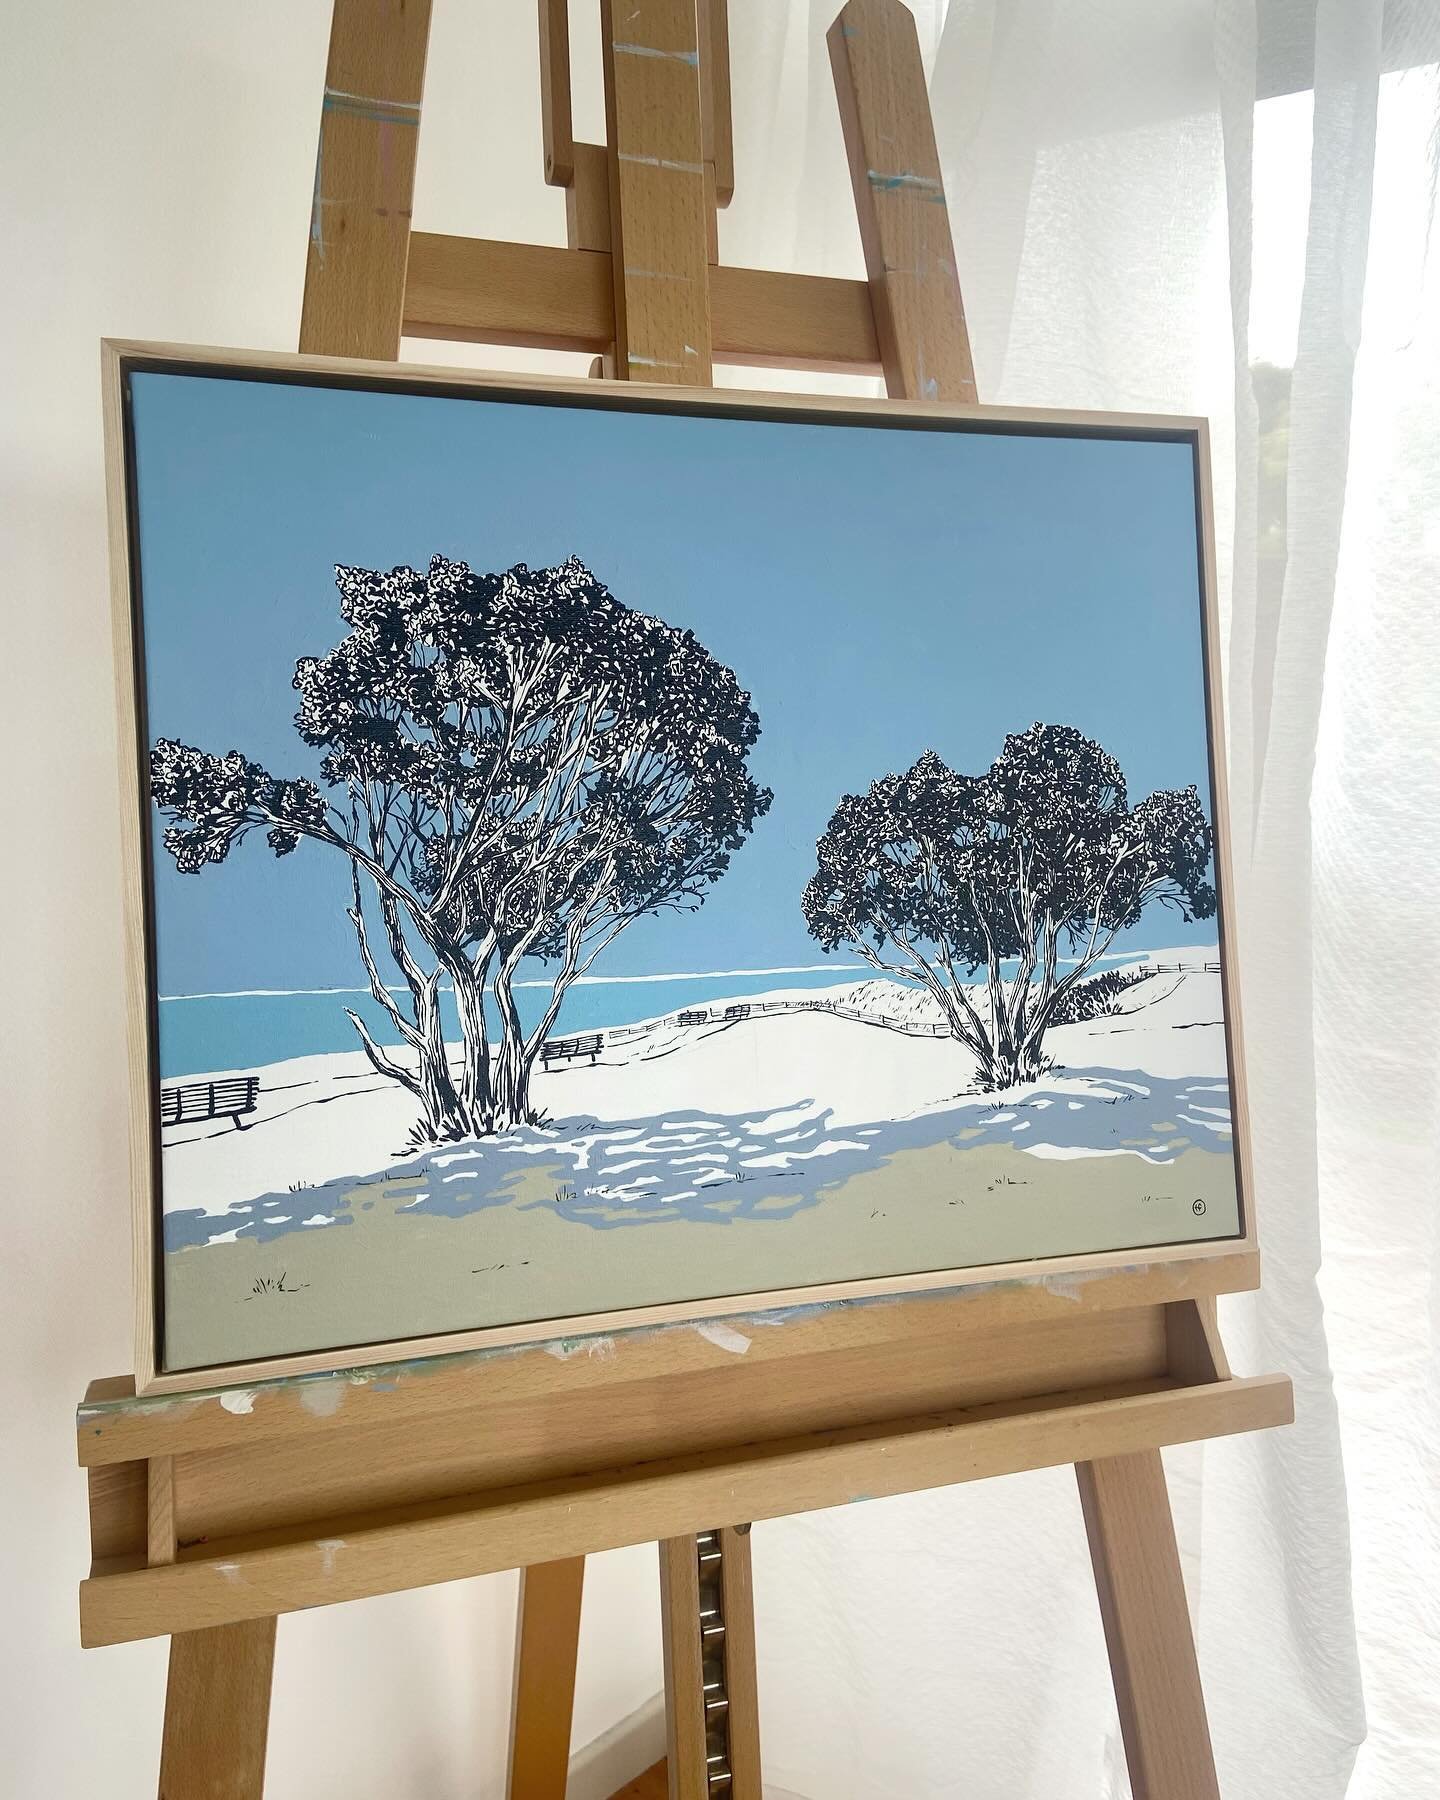 N Z  A R T  S H O W - having a trees moment 🌲

This piece will get its final flourishes and it will be available at the NZ Art Show in Wellington at the end of May. 

#nzartshow #mountmaunganui #nzbeaches